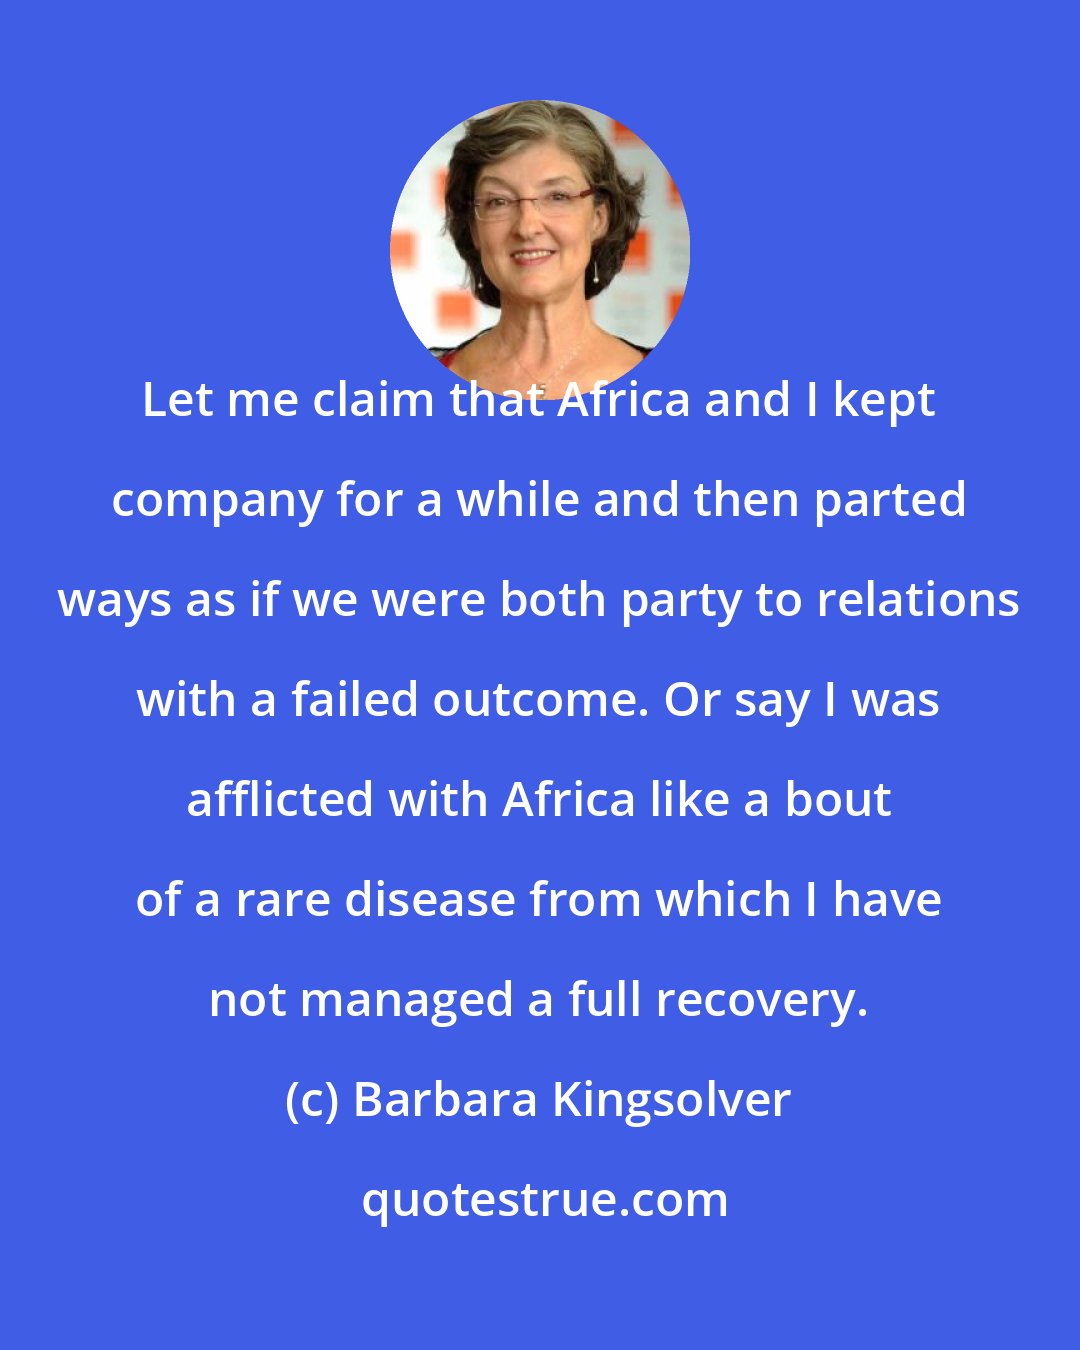 Barbara Kingsolver: Let me claim that Africa and I kept company for a while and then parted ways as if we were both party to relations with a failed outcome. Or say I was afflicted with Africa like a bout of a rare disease from which I have not managed a full recovery.